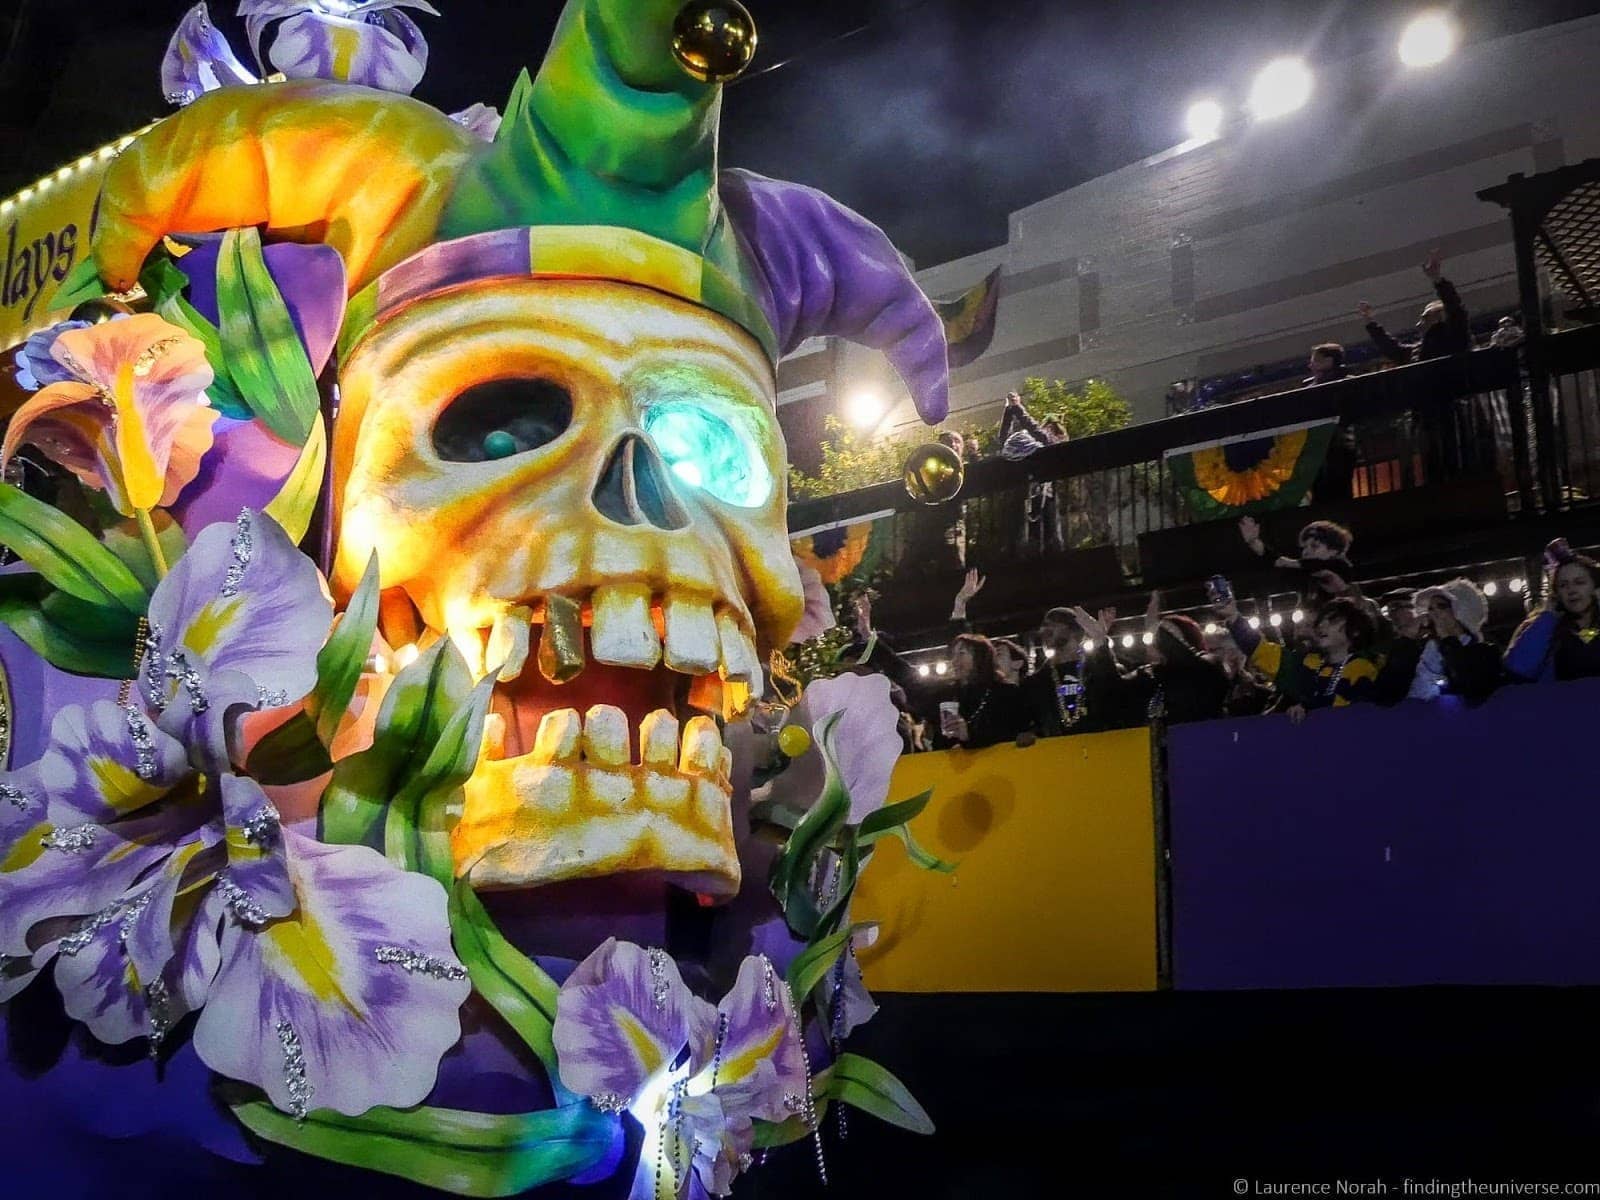 New Orleans Events Calendar 2022 Mardi Gras 2022 In New Orleans - A Full Guide - Finding The Universe